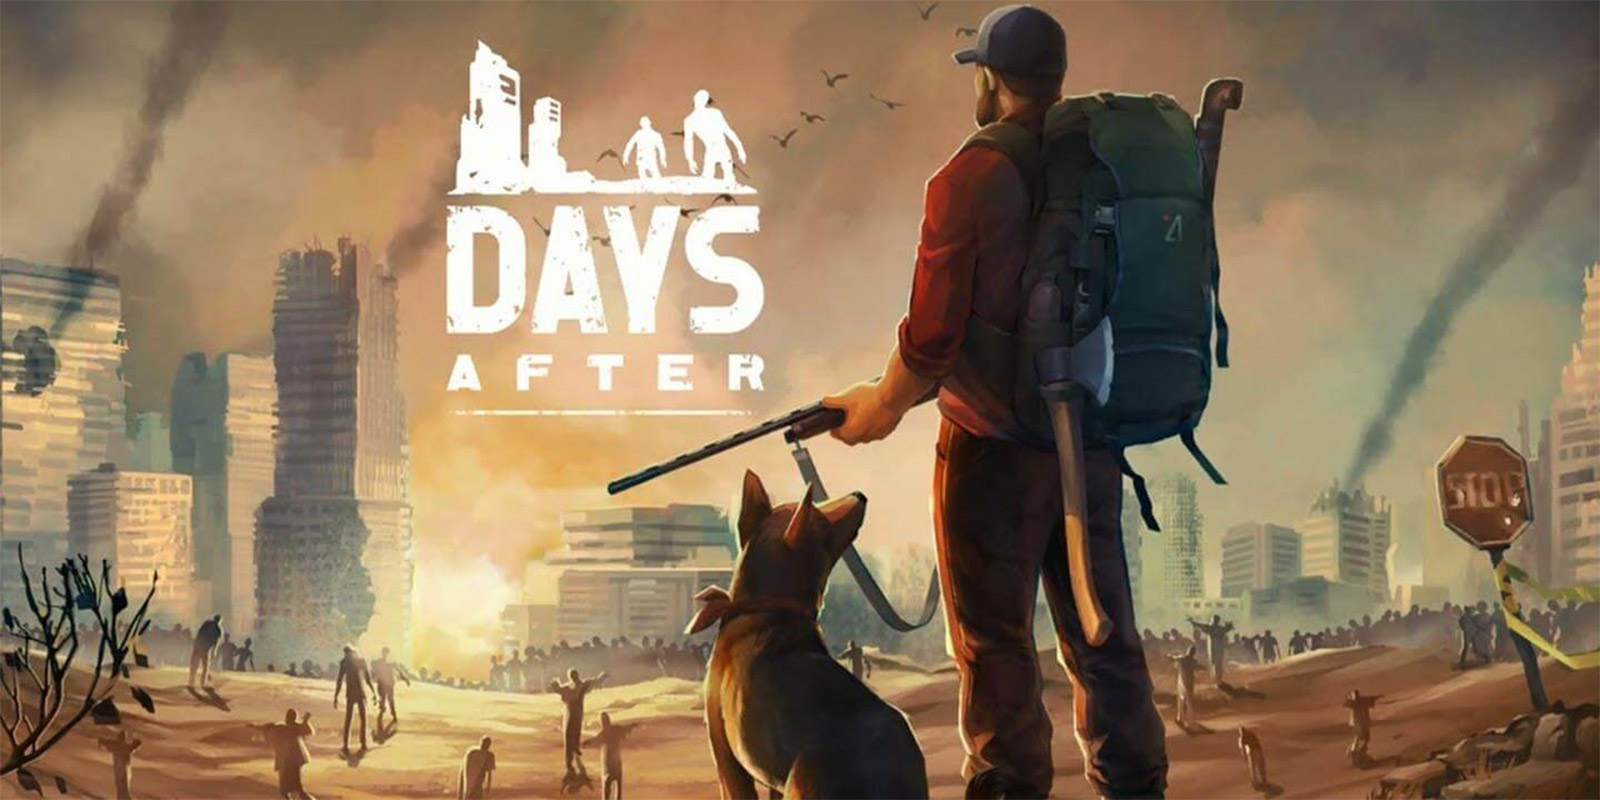 9 days игра. Days after игра. Days after зомби апокалипсис. Days after Zombie Survival. Day after Day игра.